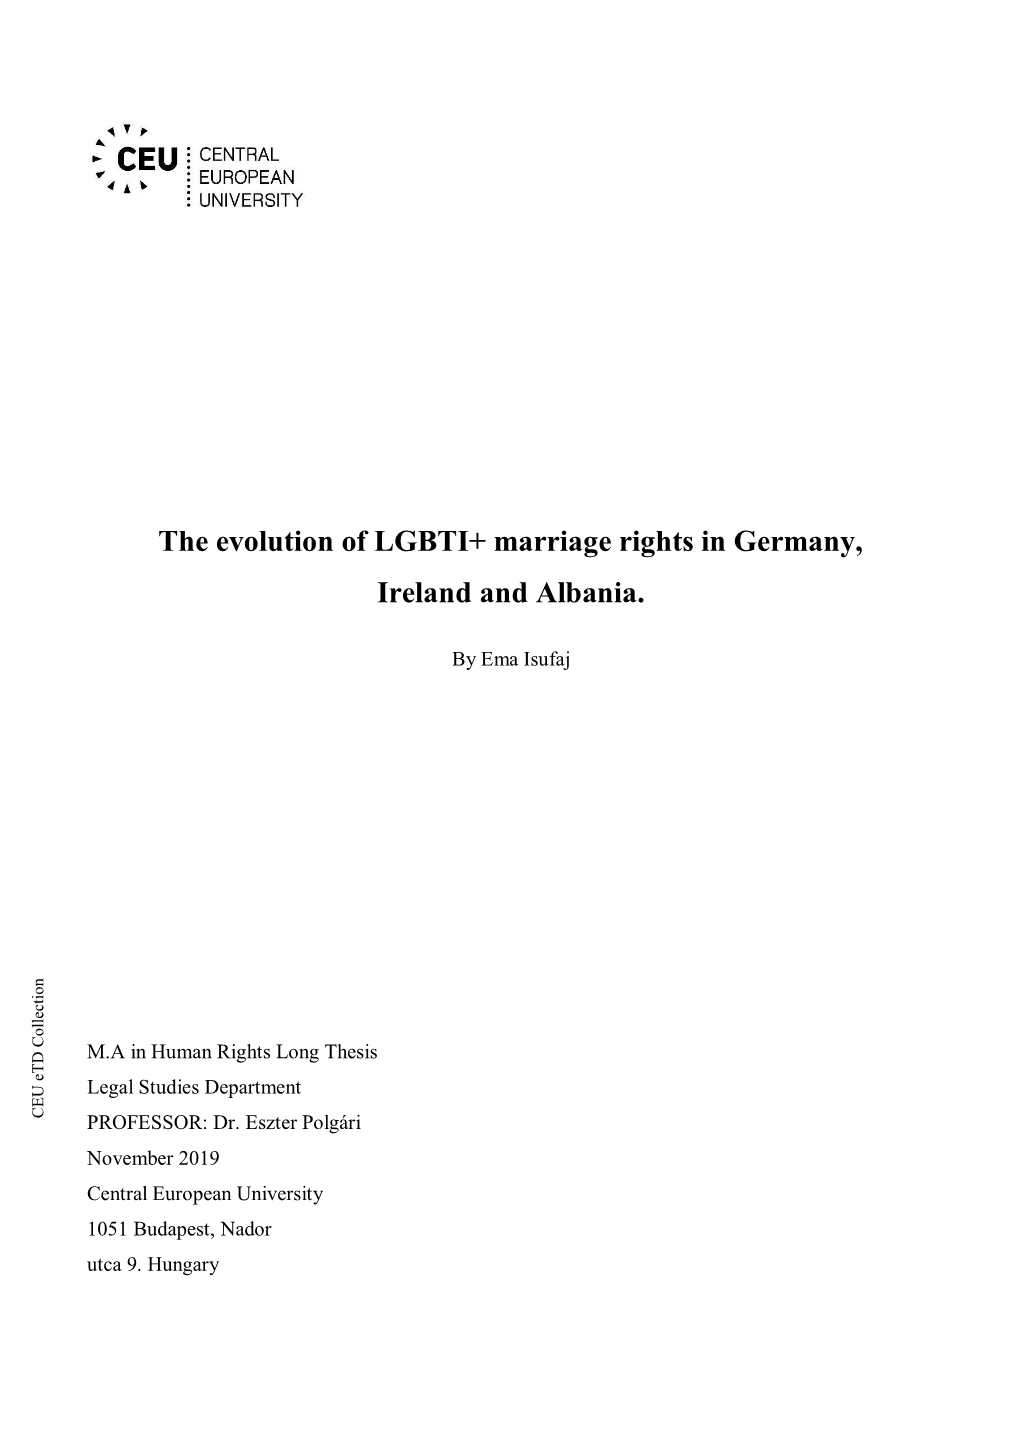 The Evolution of LGBTI+ Marriage Rights in Germany, Ireland and Albania